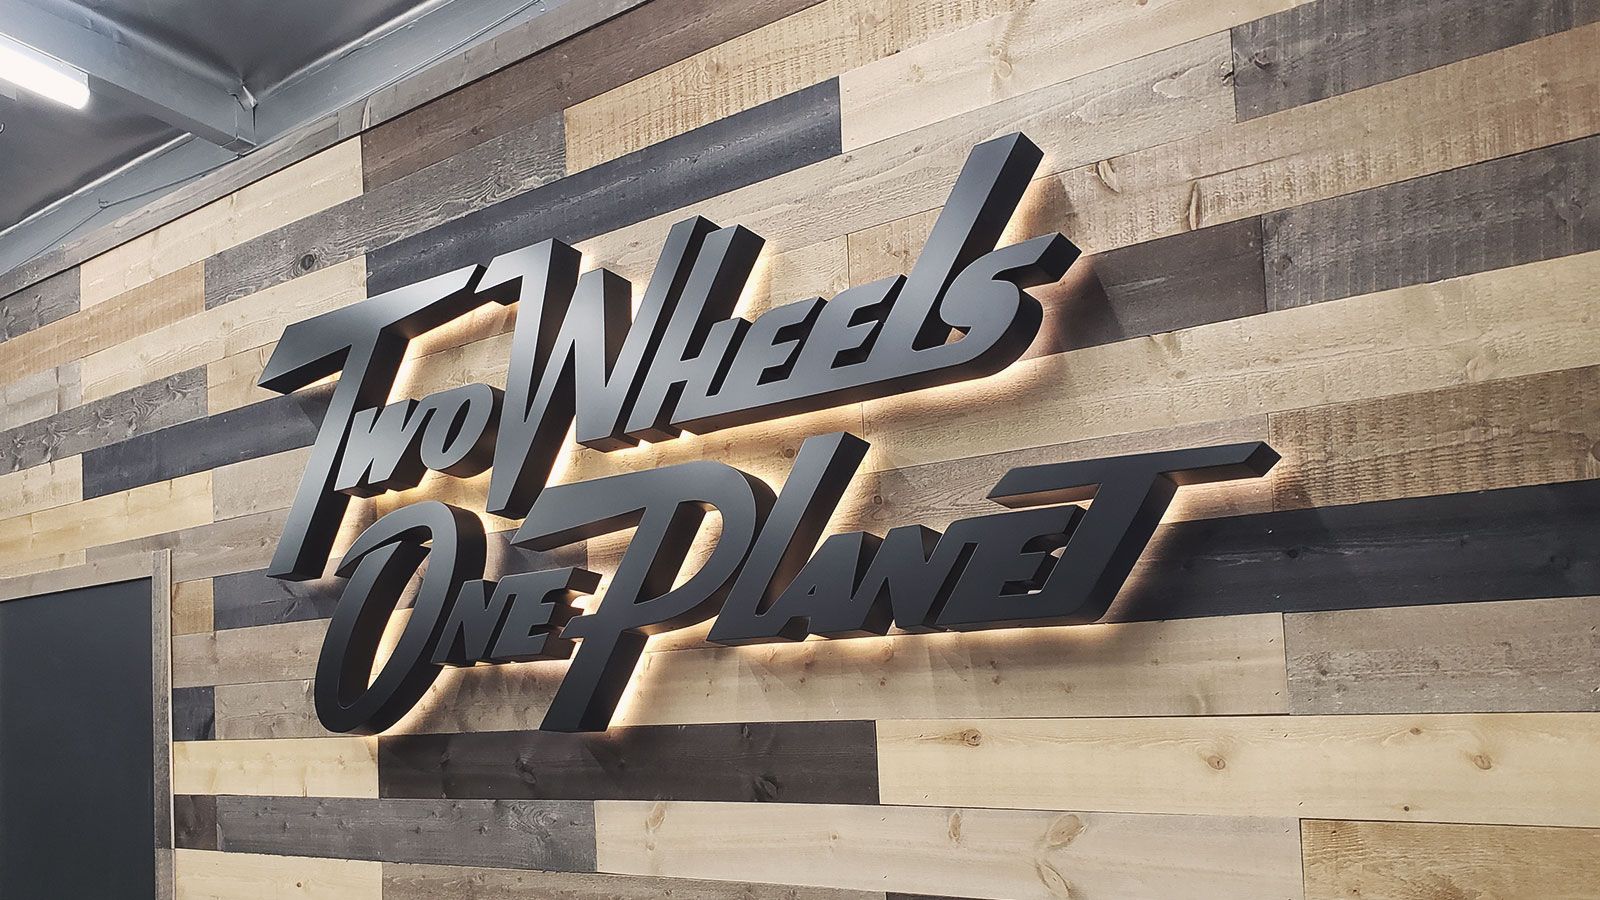 two wheels one planet led sign